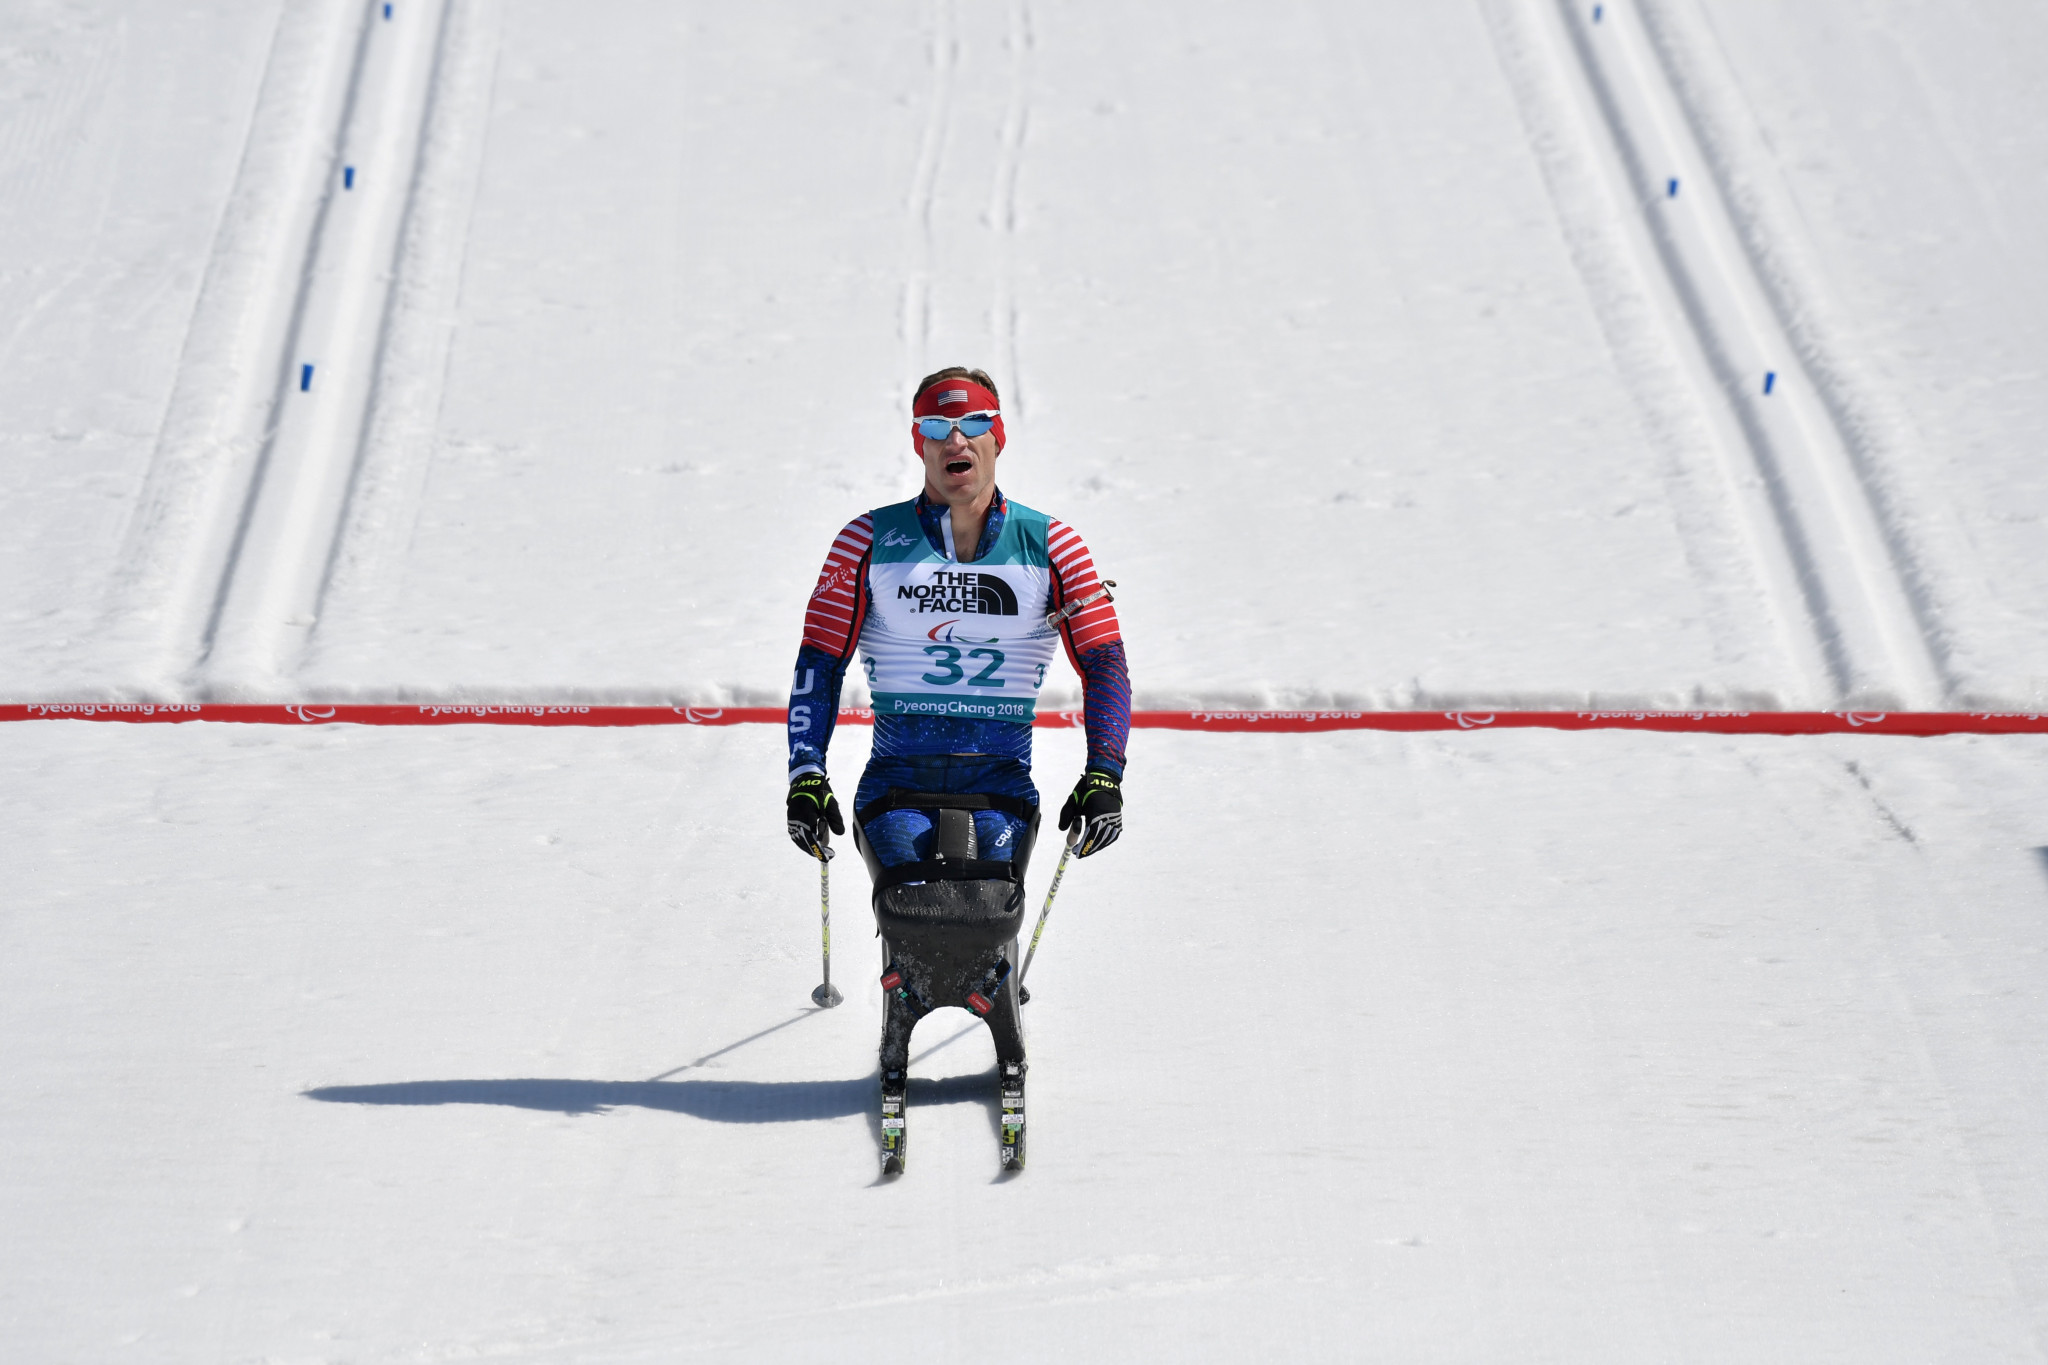 Daniel Cnossen will be looking to add more medals to his tally in Sweden ©Getty Images